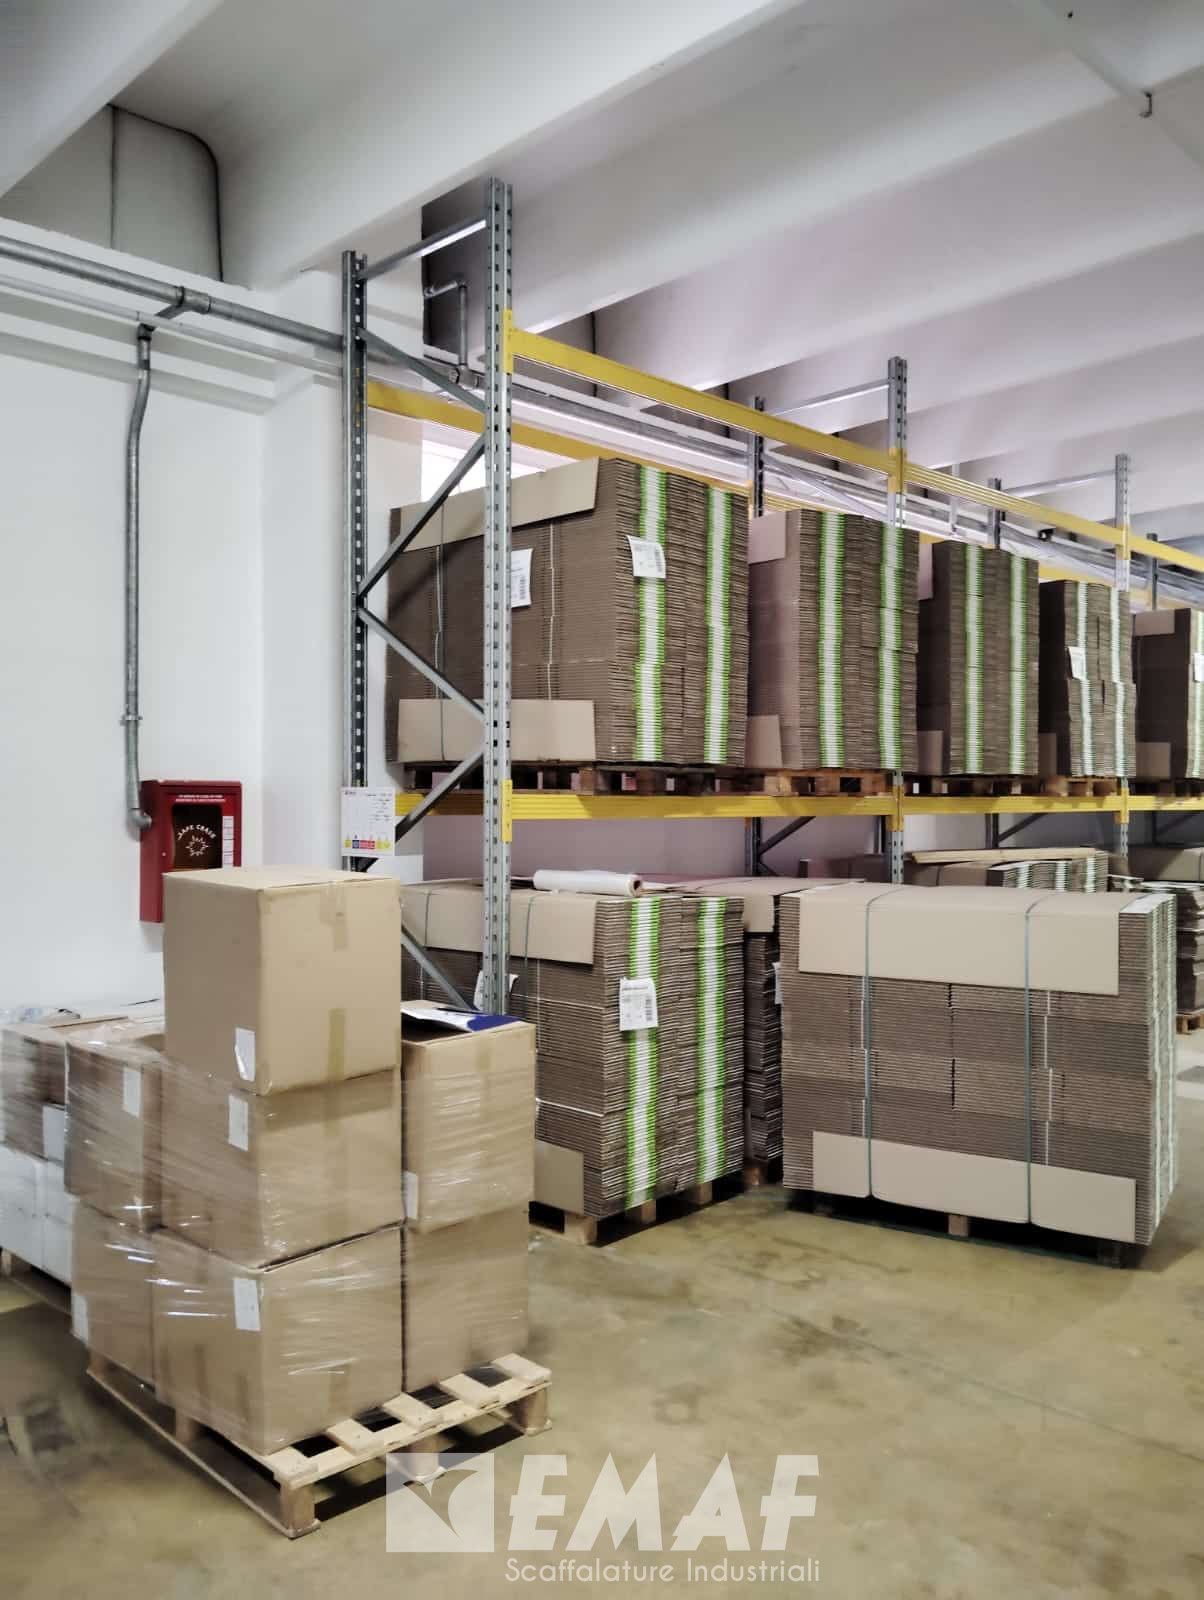 Featured image for “EMAF pallet racking tested in the cold”